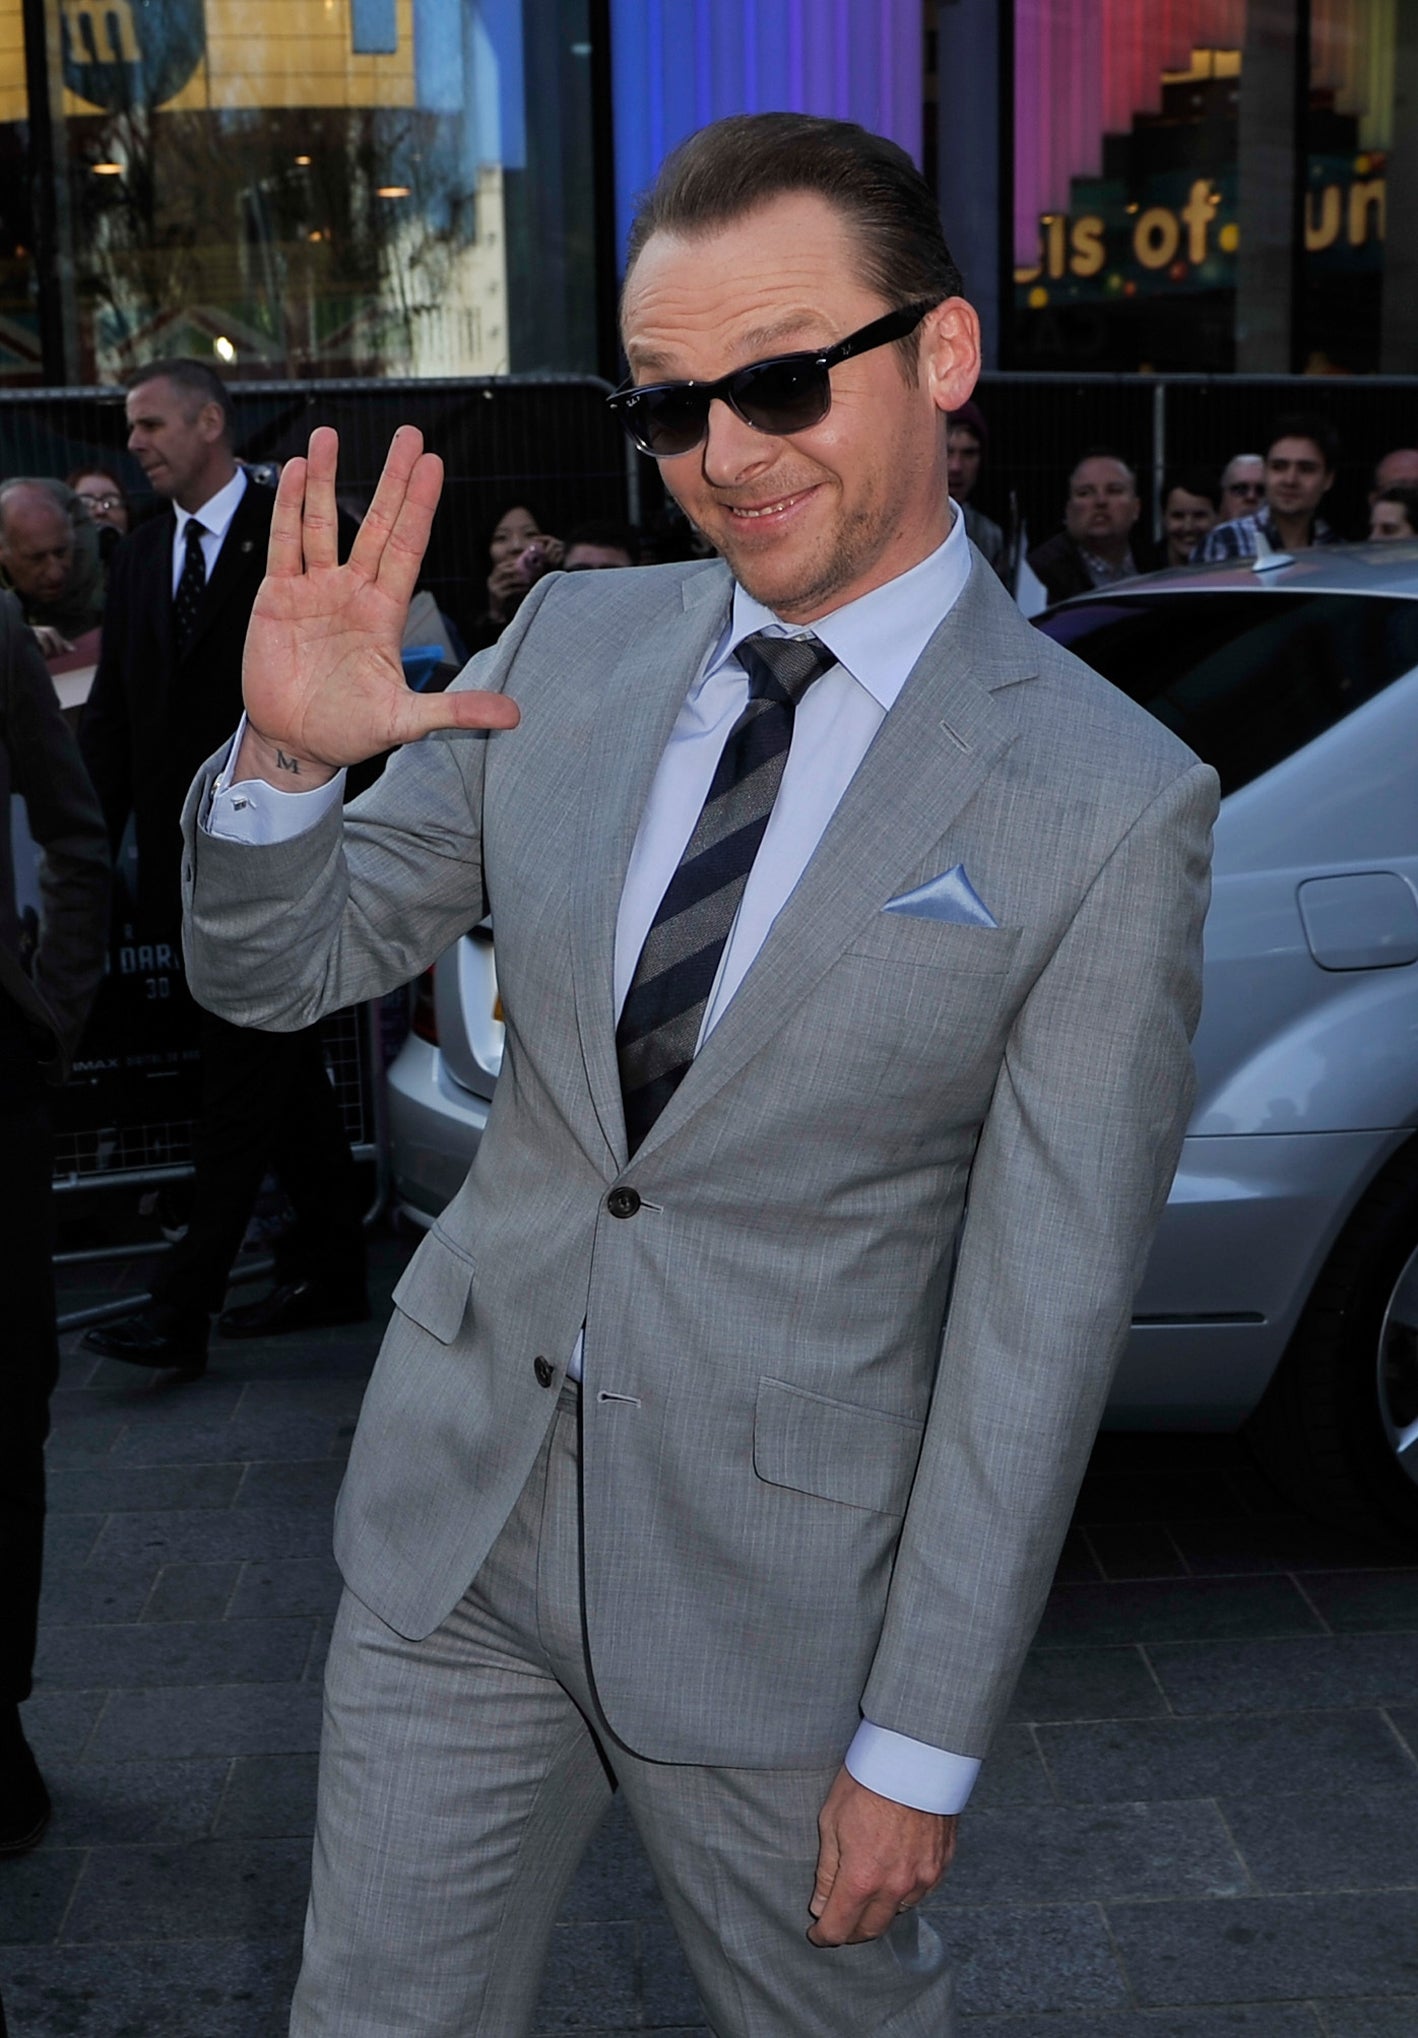 Simon Pegg at the Star Trek Into Darkness premiere in London